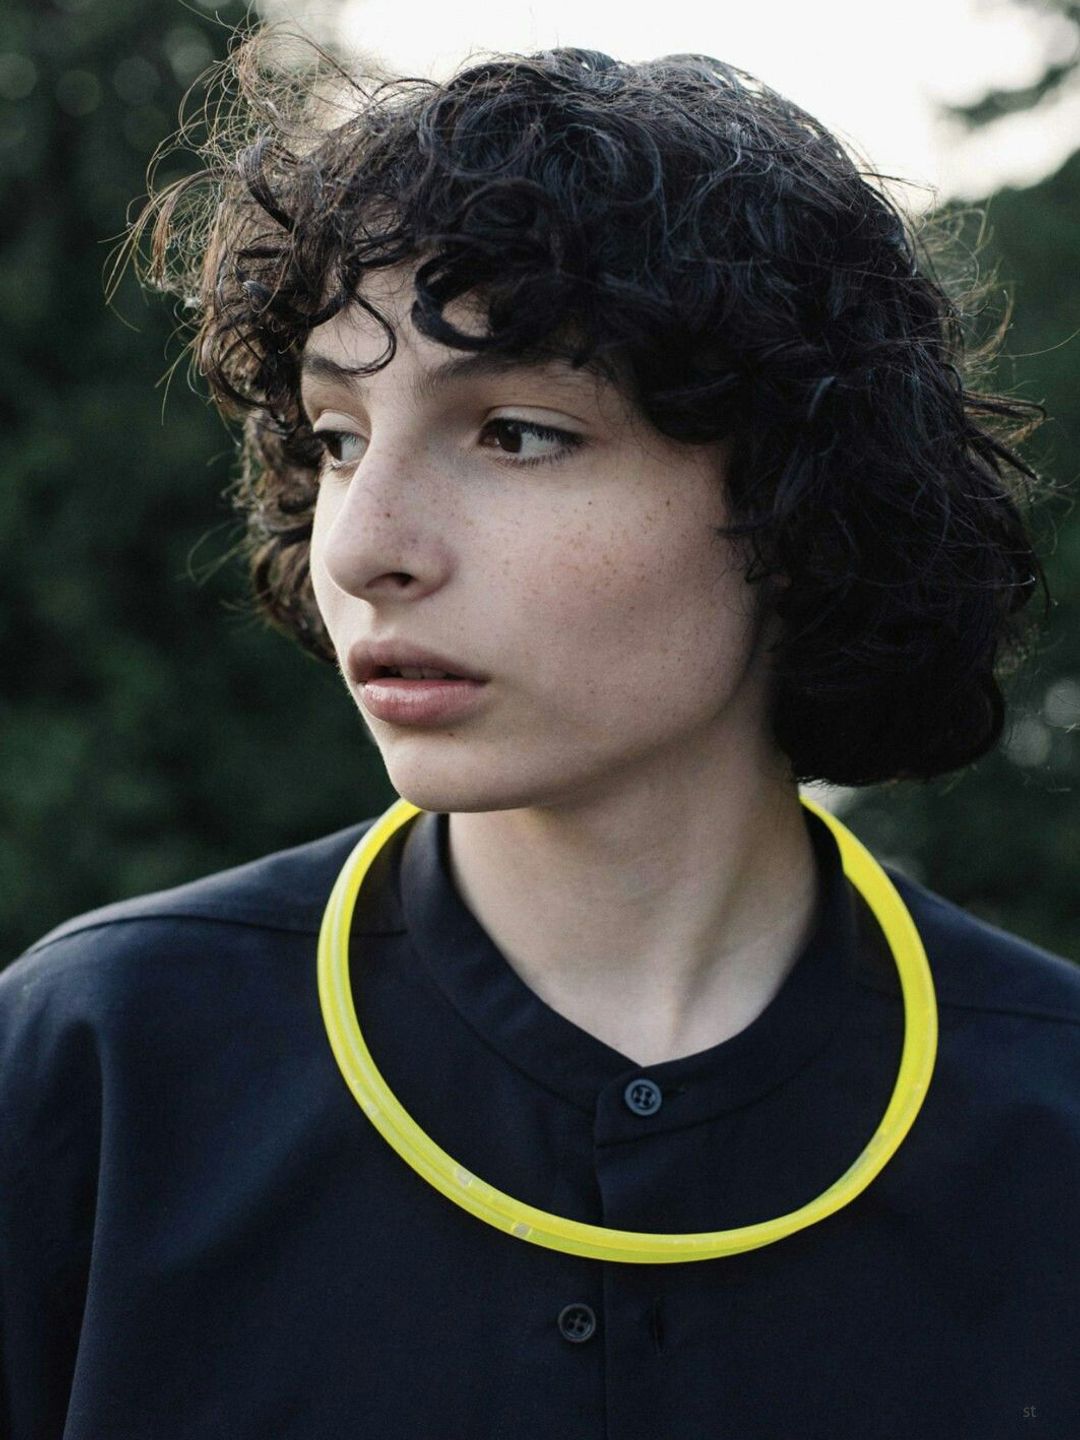 Finn Wolfhard how did he became famous